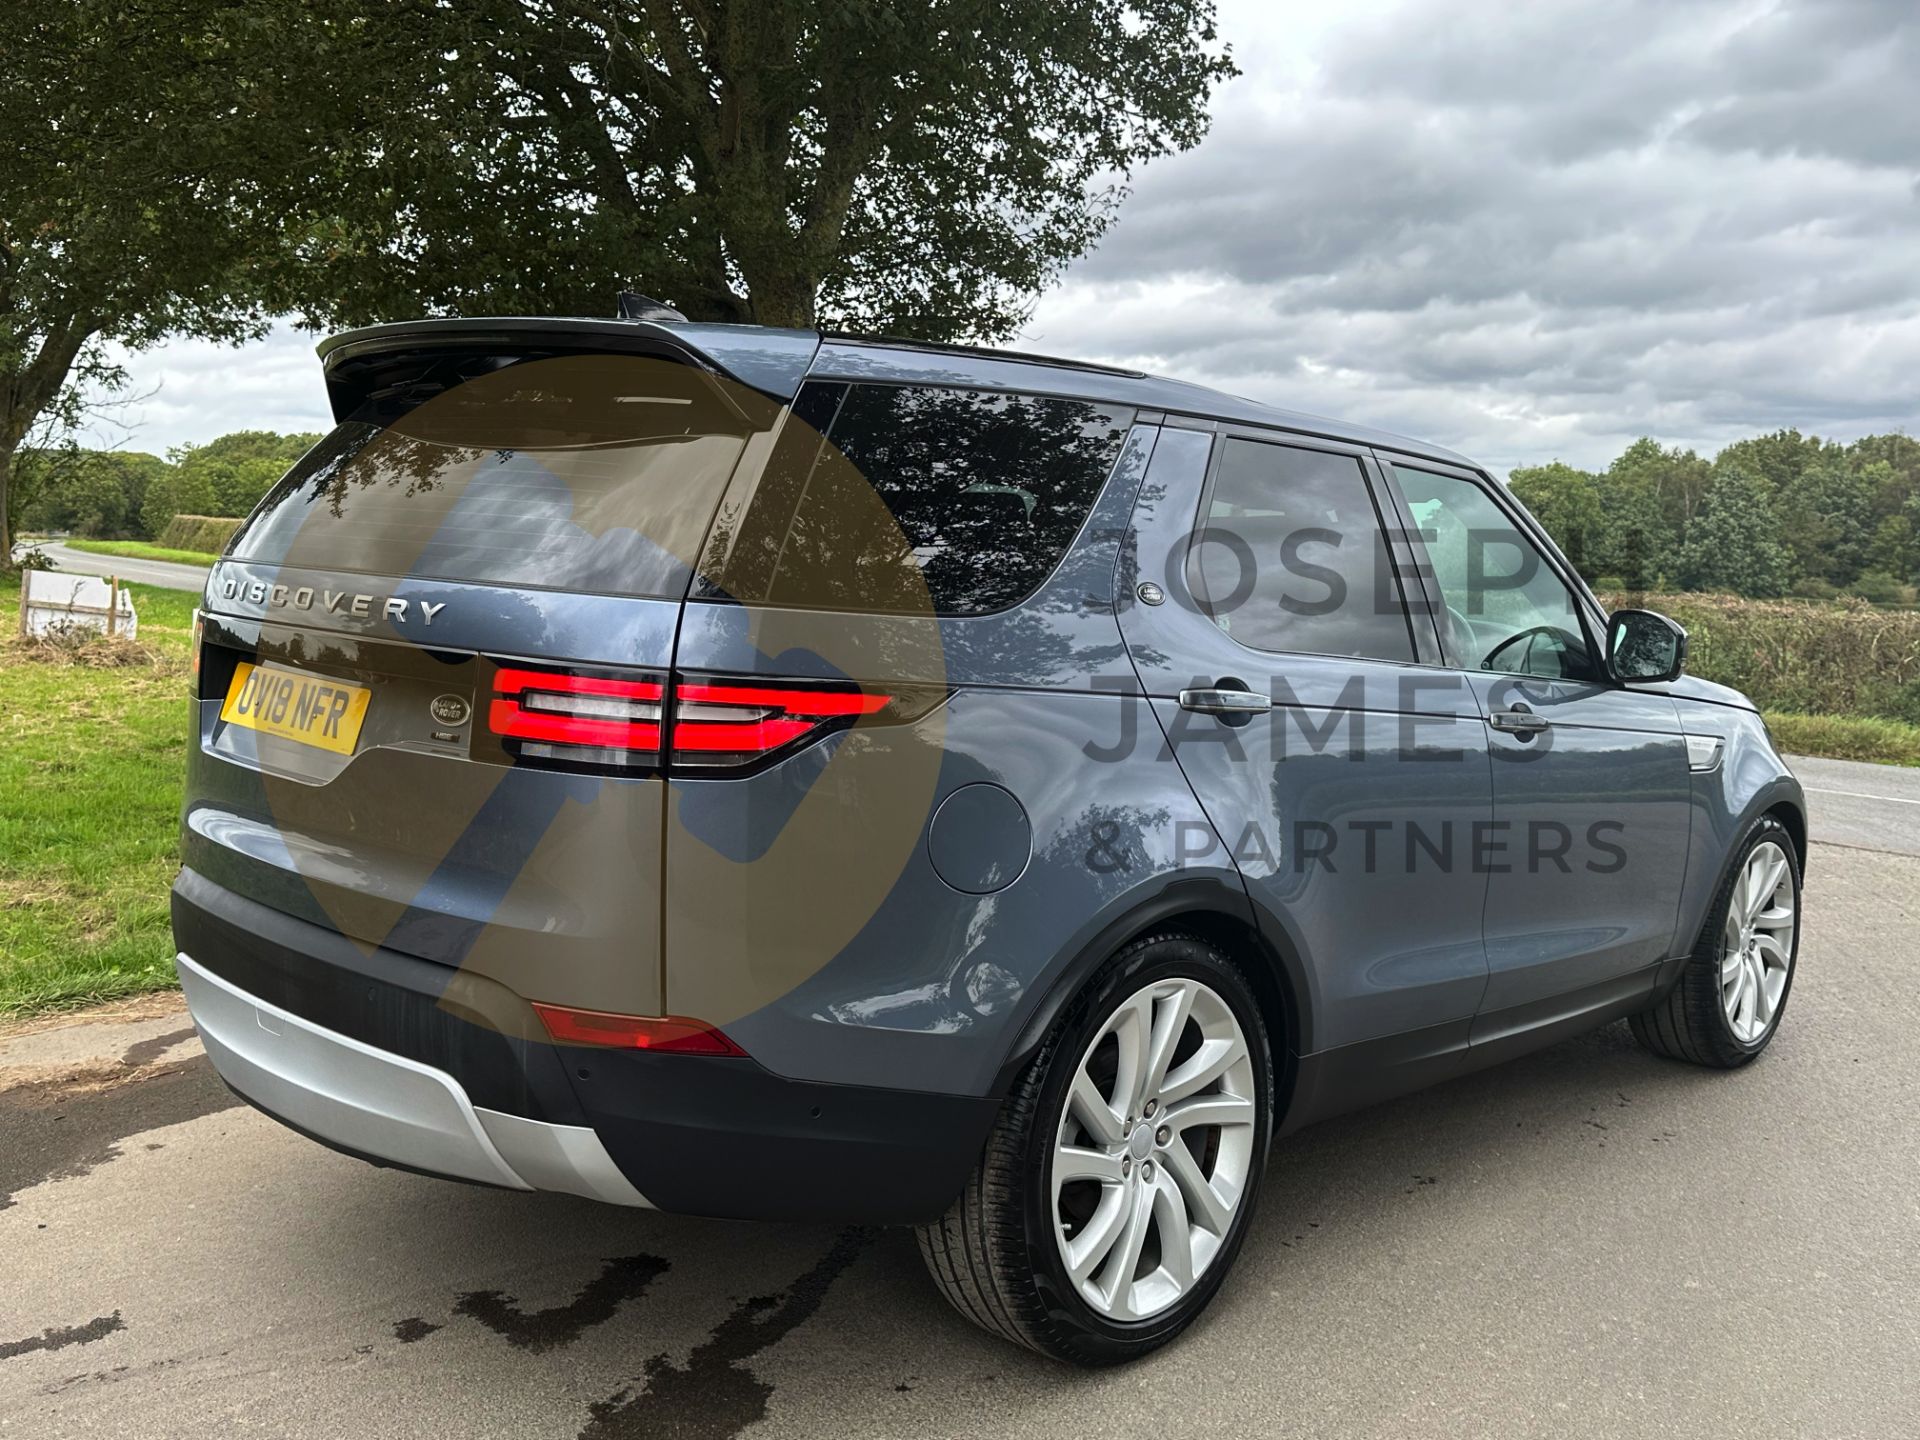 (ON SALE) LAND ROVER DISCOVERY 5 *HSE LUXURY* 7 SEATER SUV (2018 - FACELIFT MODEL) (LOW MILEAGE) - Image 12 of 66